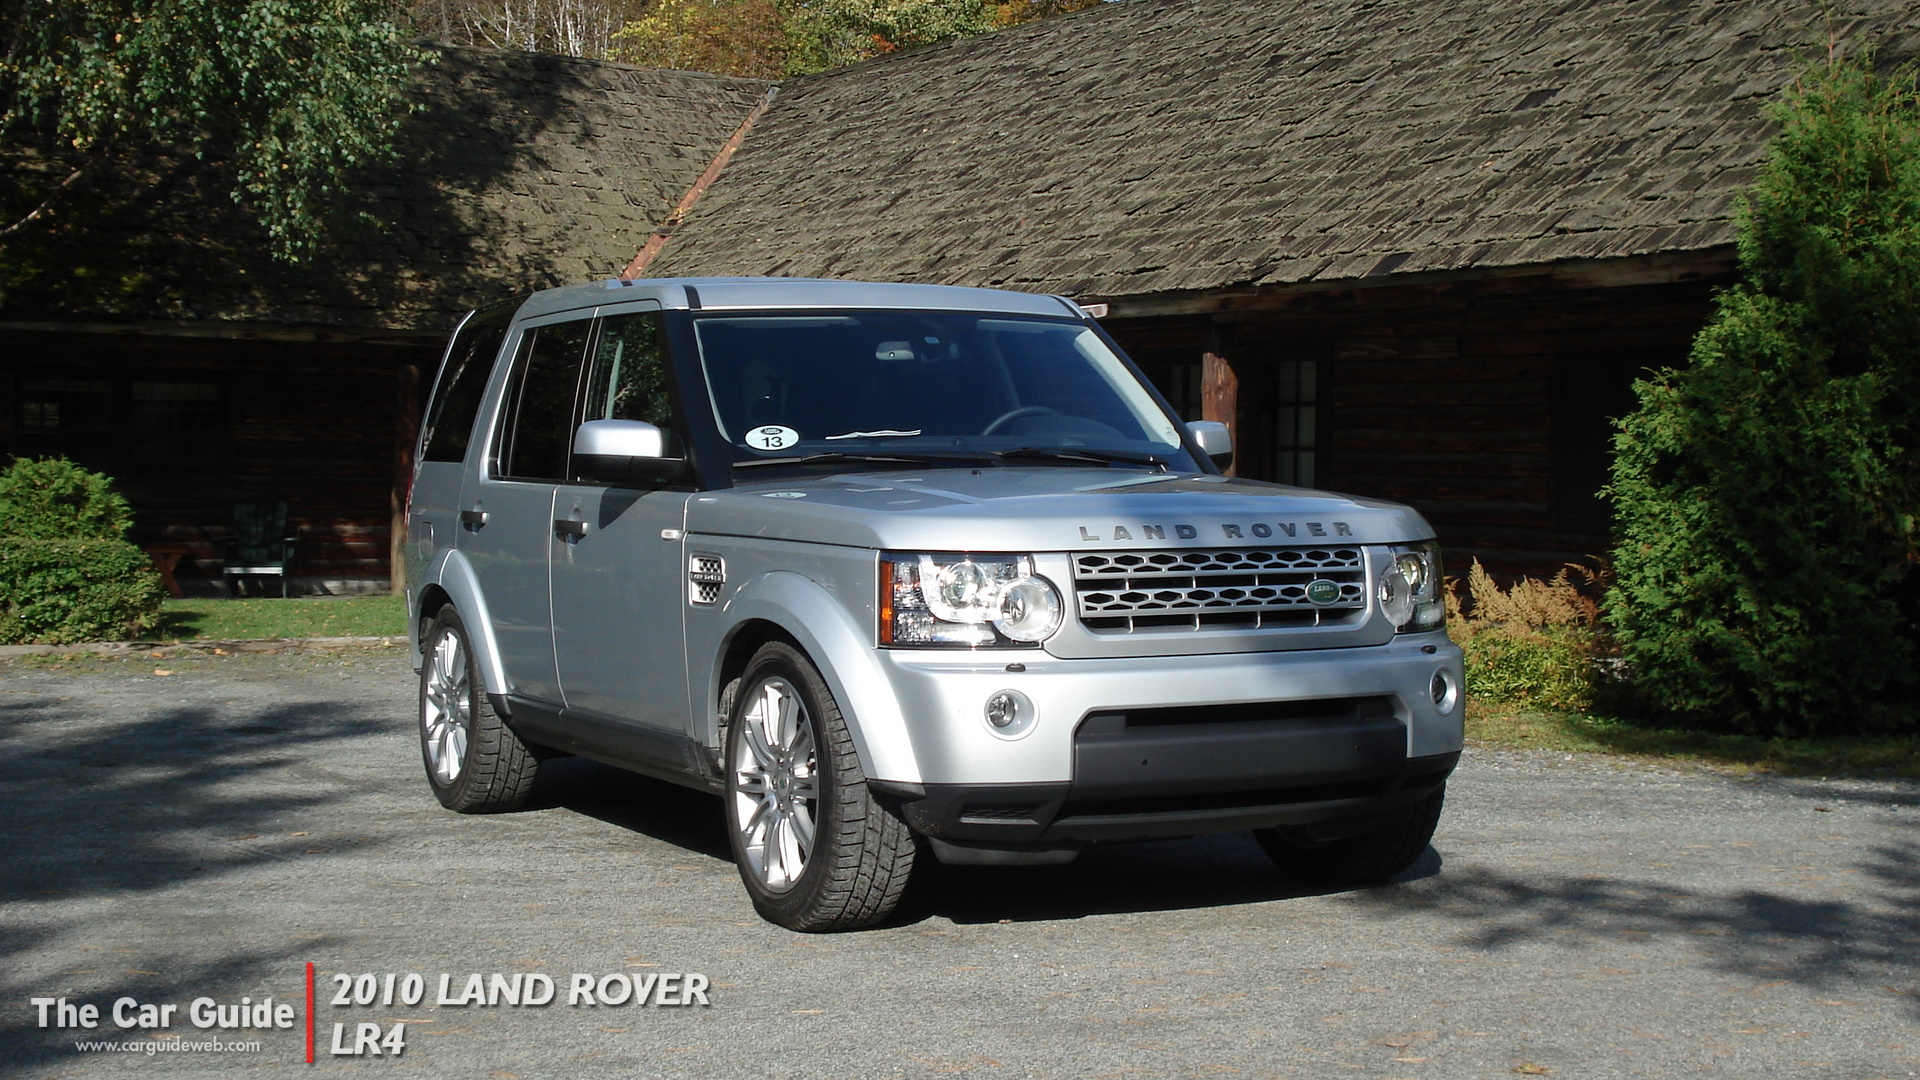 Land Rover Wallpaper Papers Multimedia Picture Car